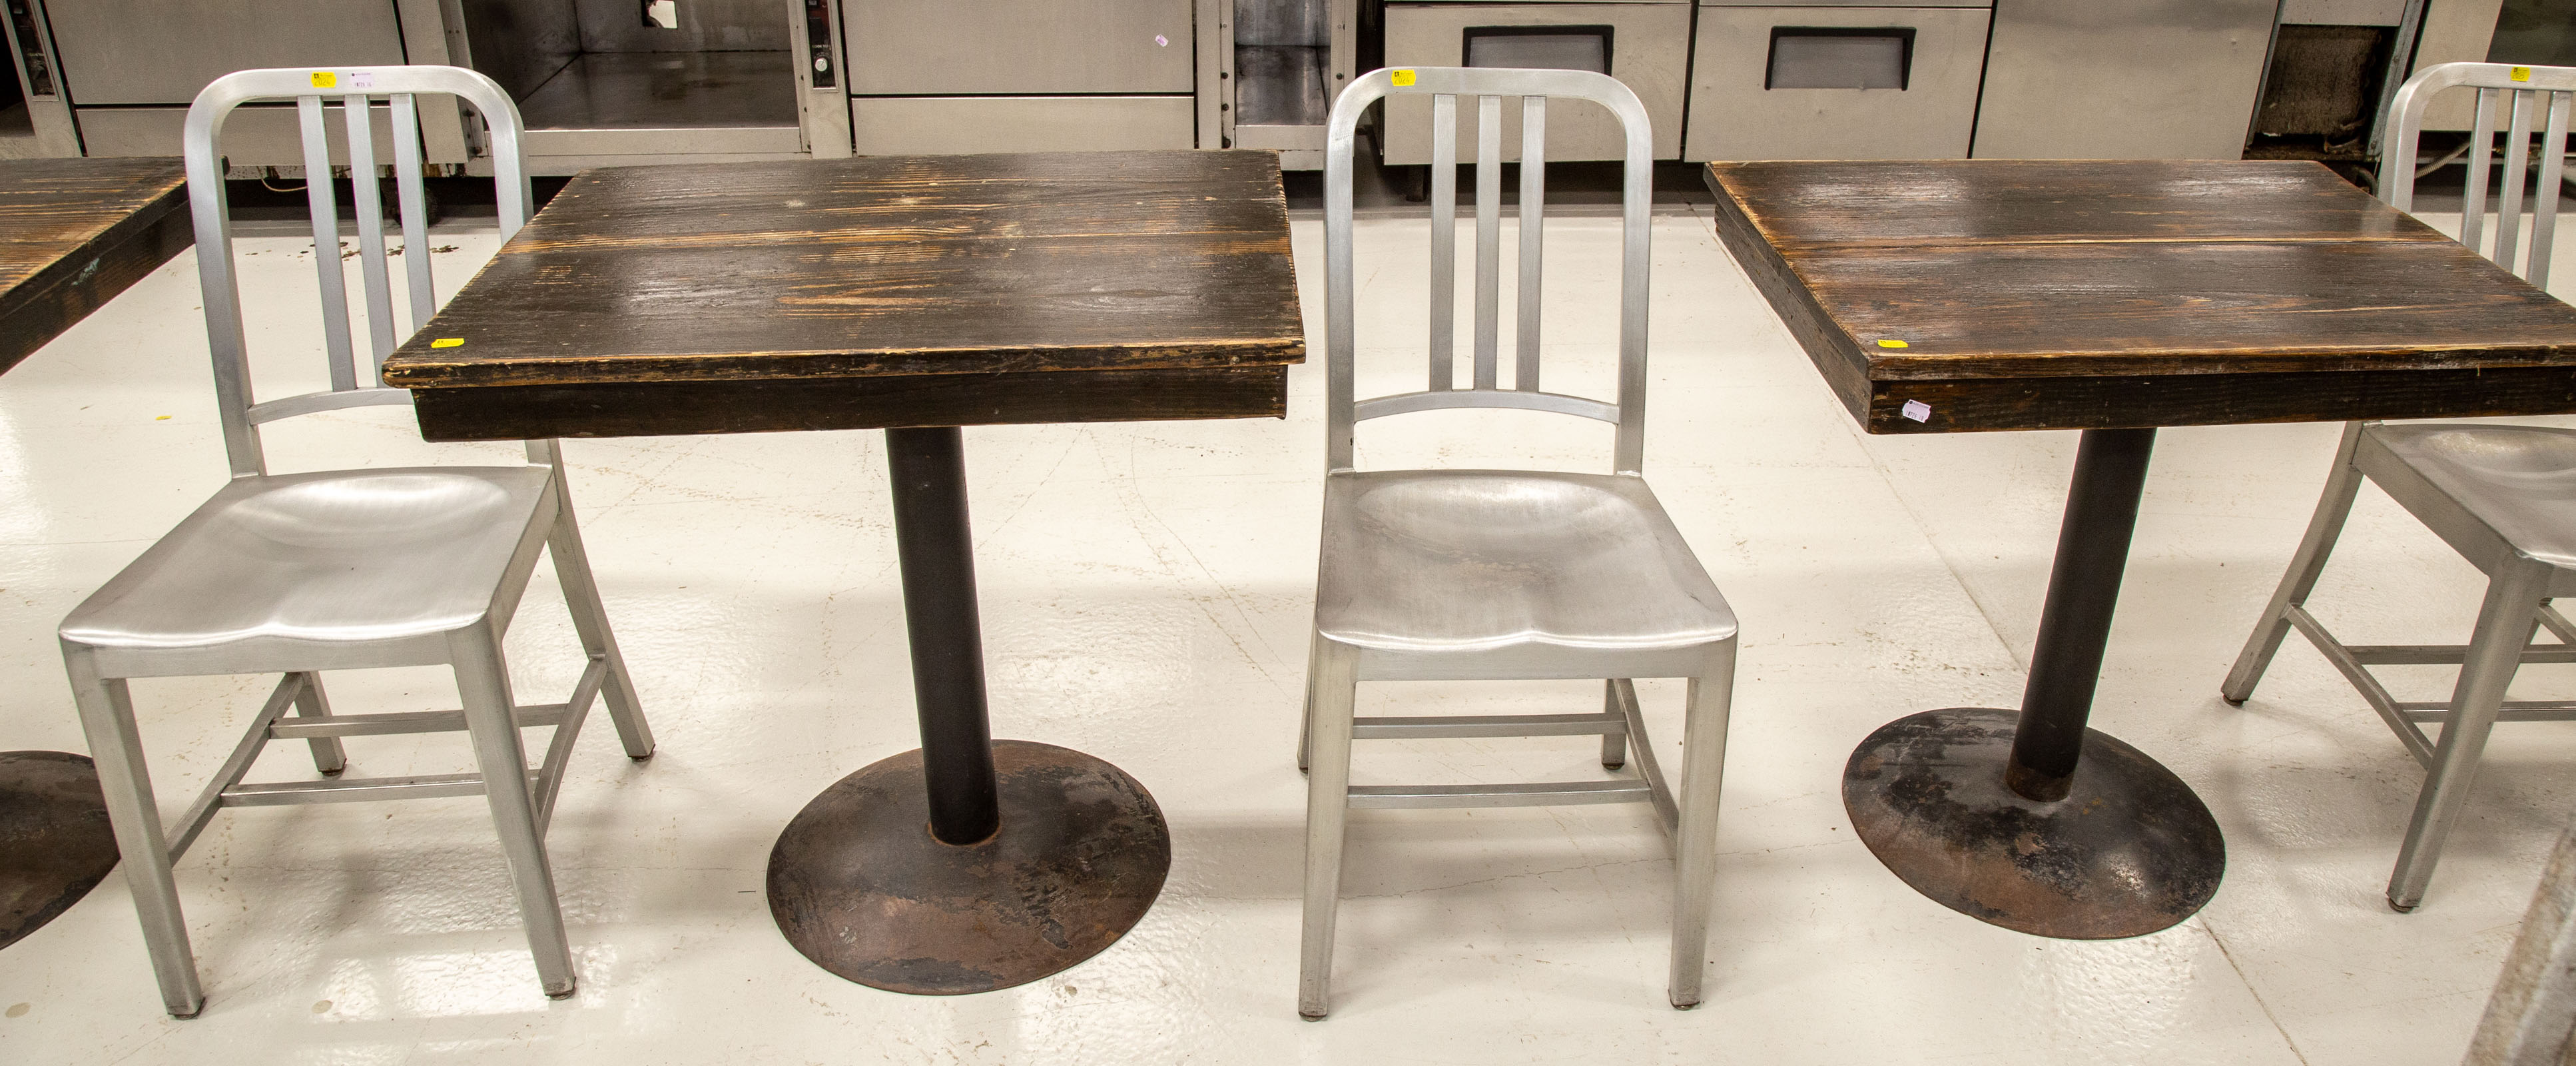 TWO WOODBERRY KITCHEN TABLES  337d5a